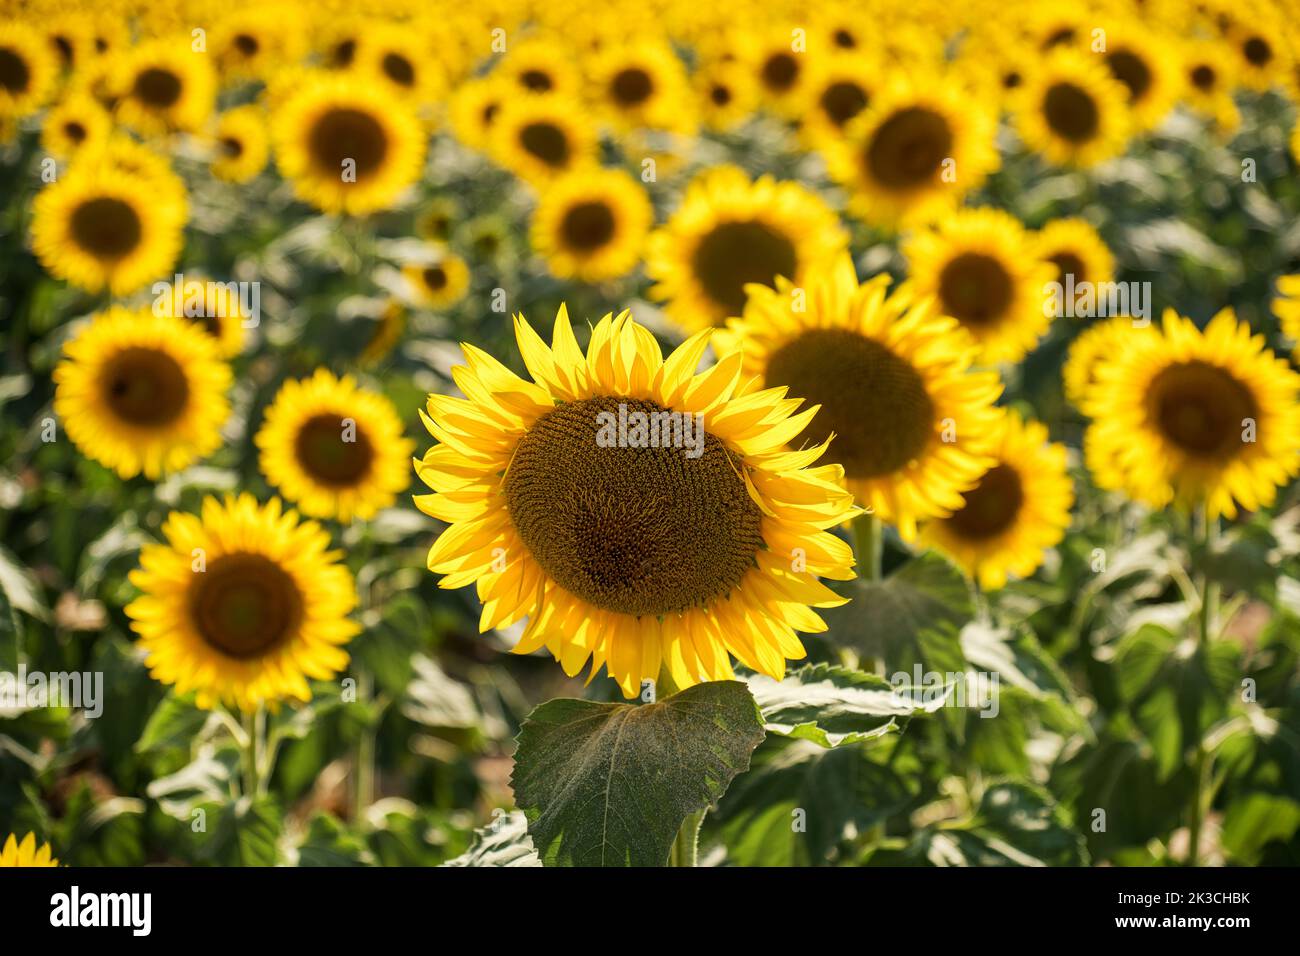 High angle of fresh tender sunflowers with bright yellow petals growing on field on sunny day Stock Photo